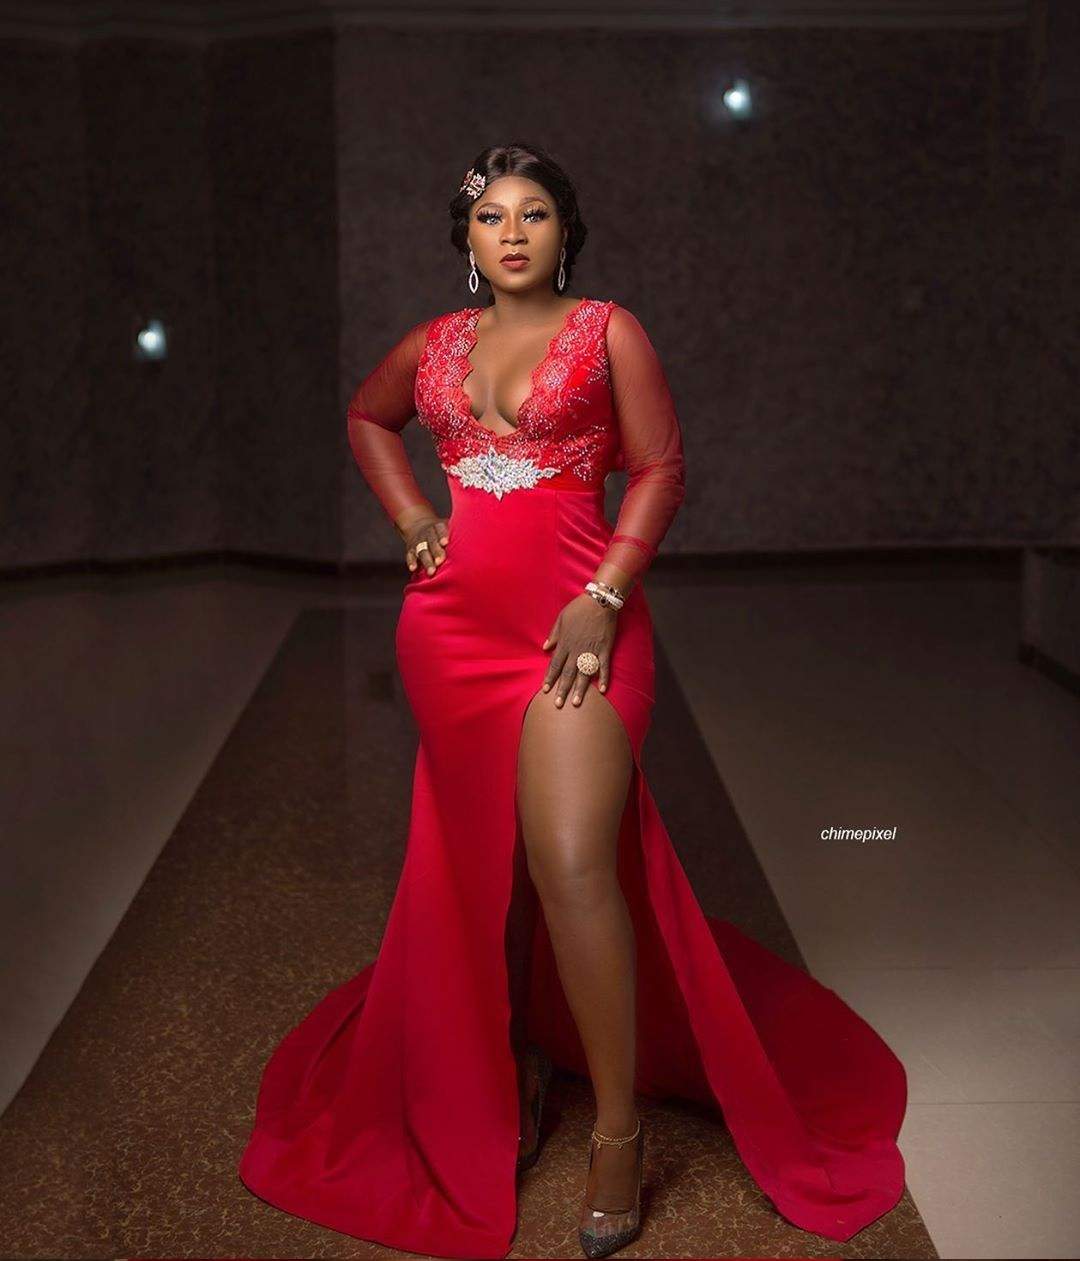 Nollywood Actress, Destiny Etiko shares sultry photos as she clocks a new year.